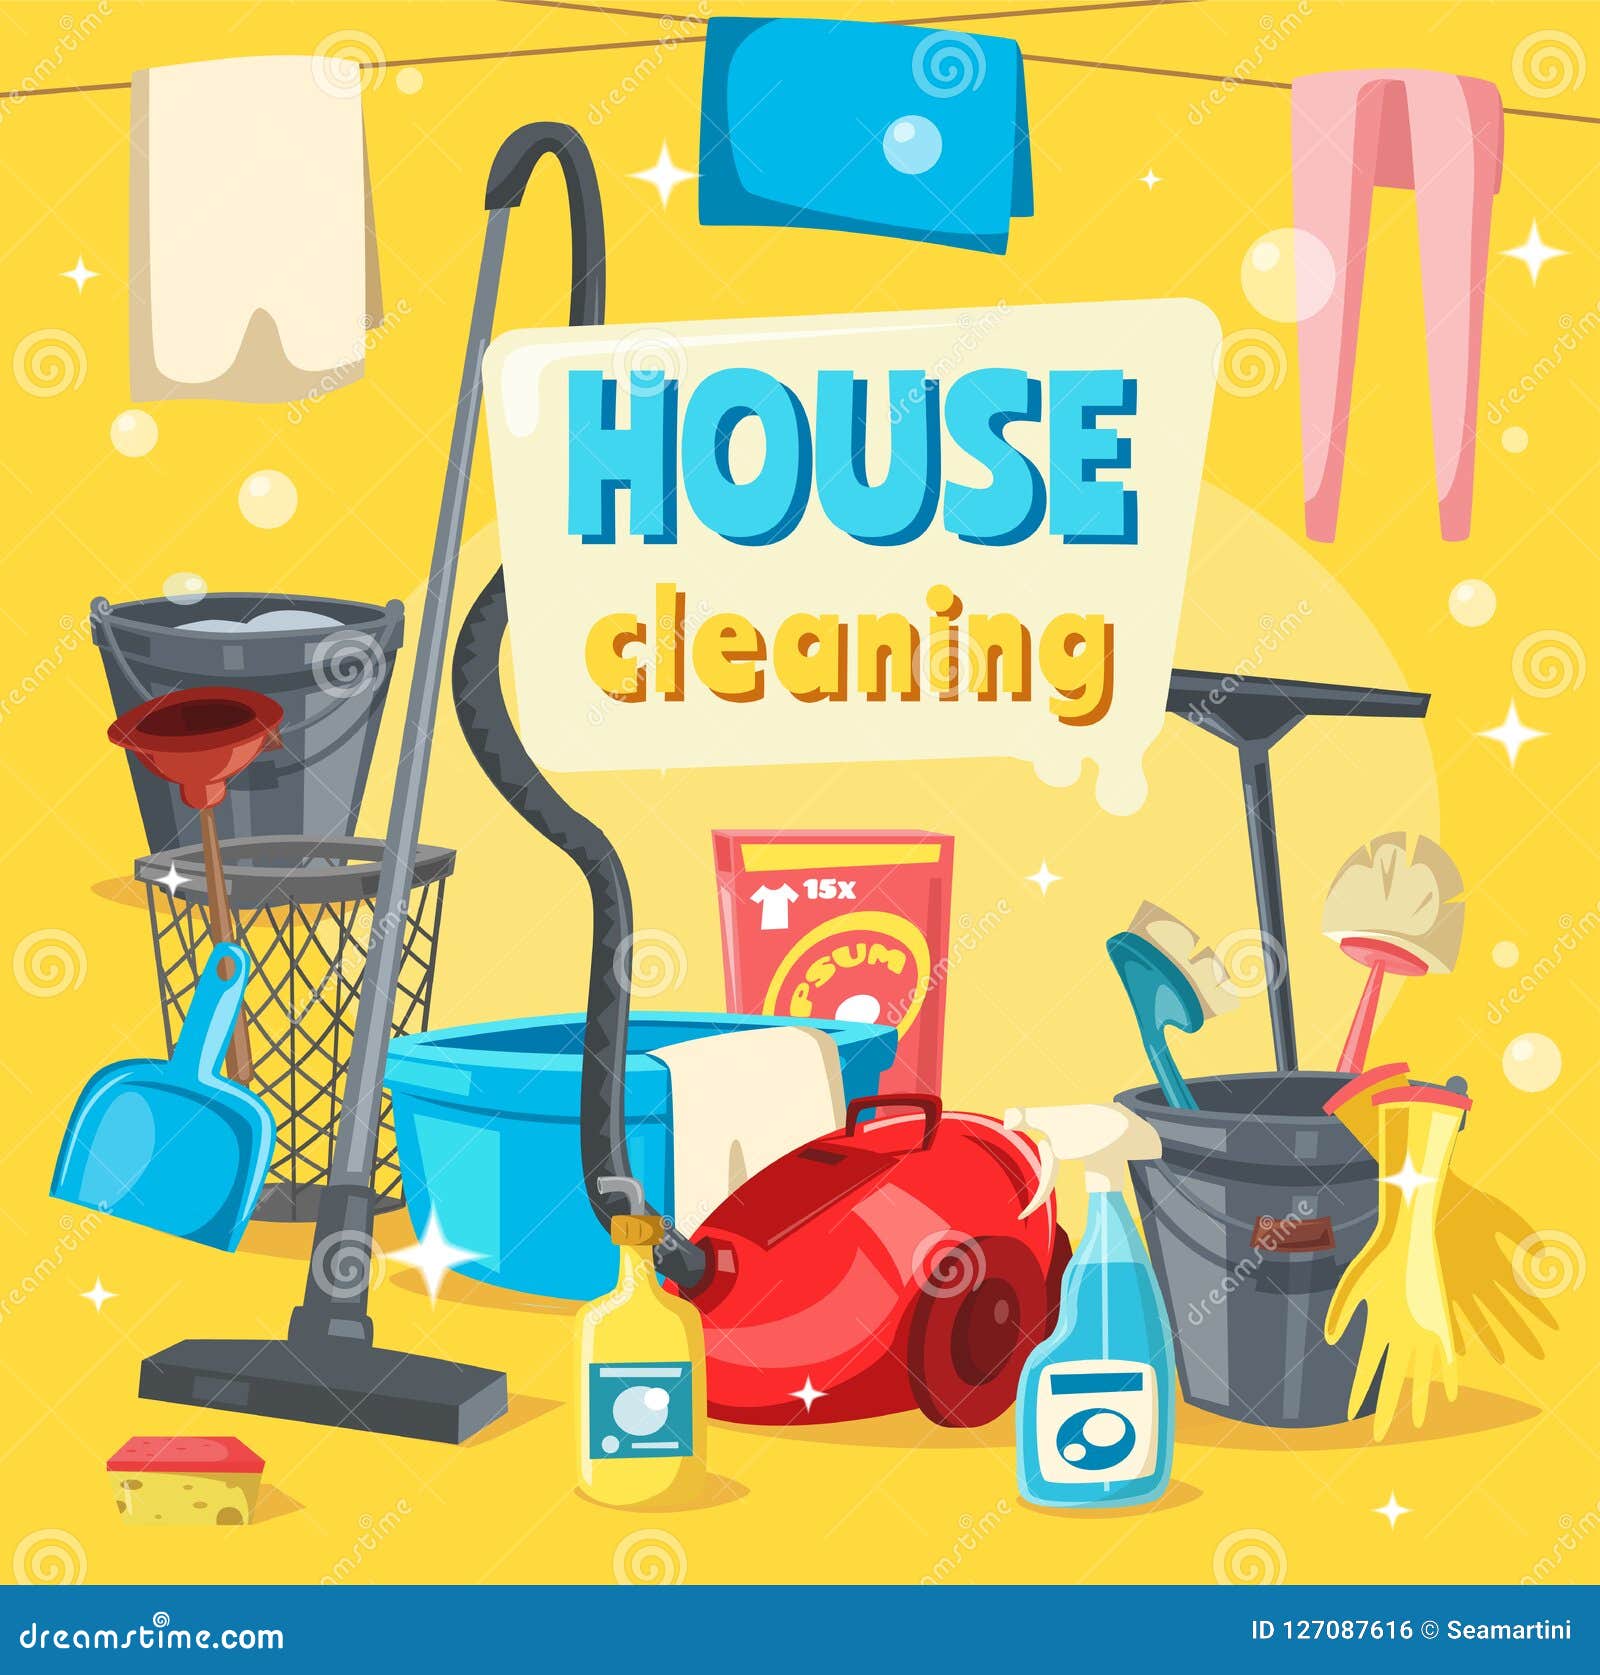 Residential Cleaning Services In Cliffside Park Nj